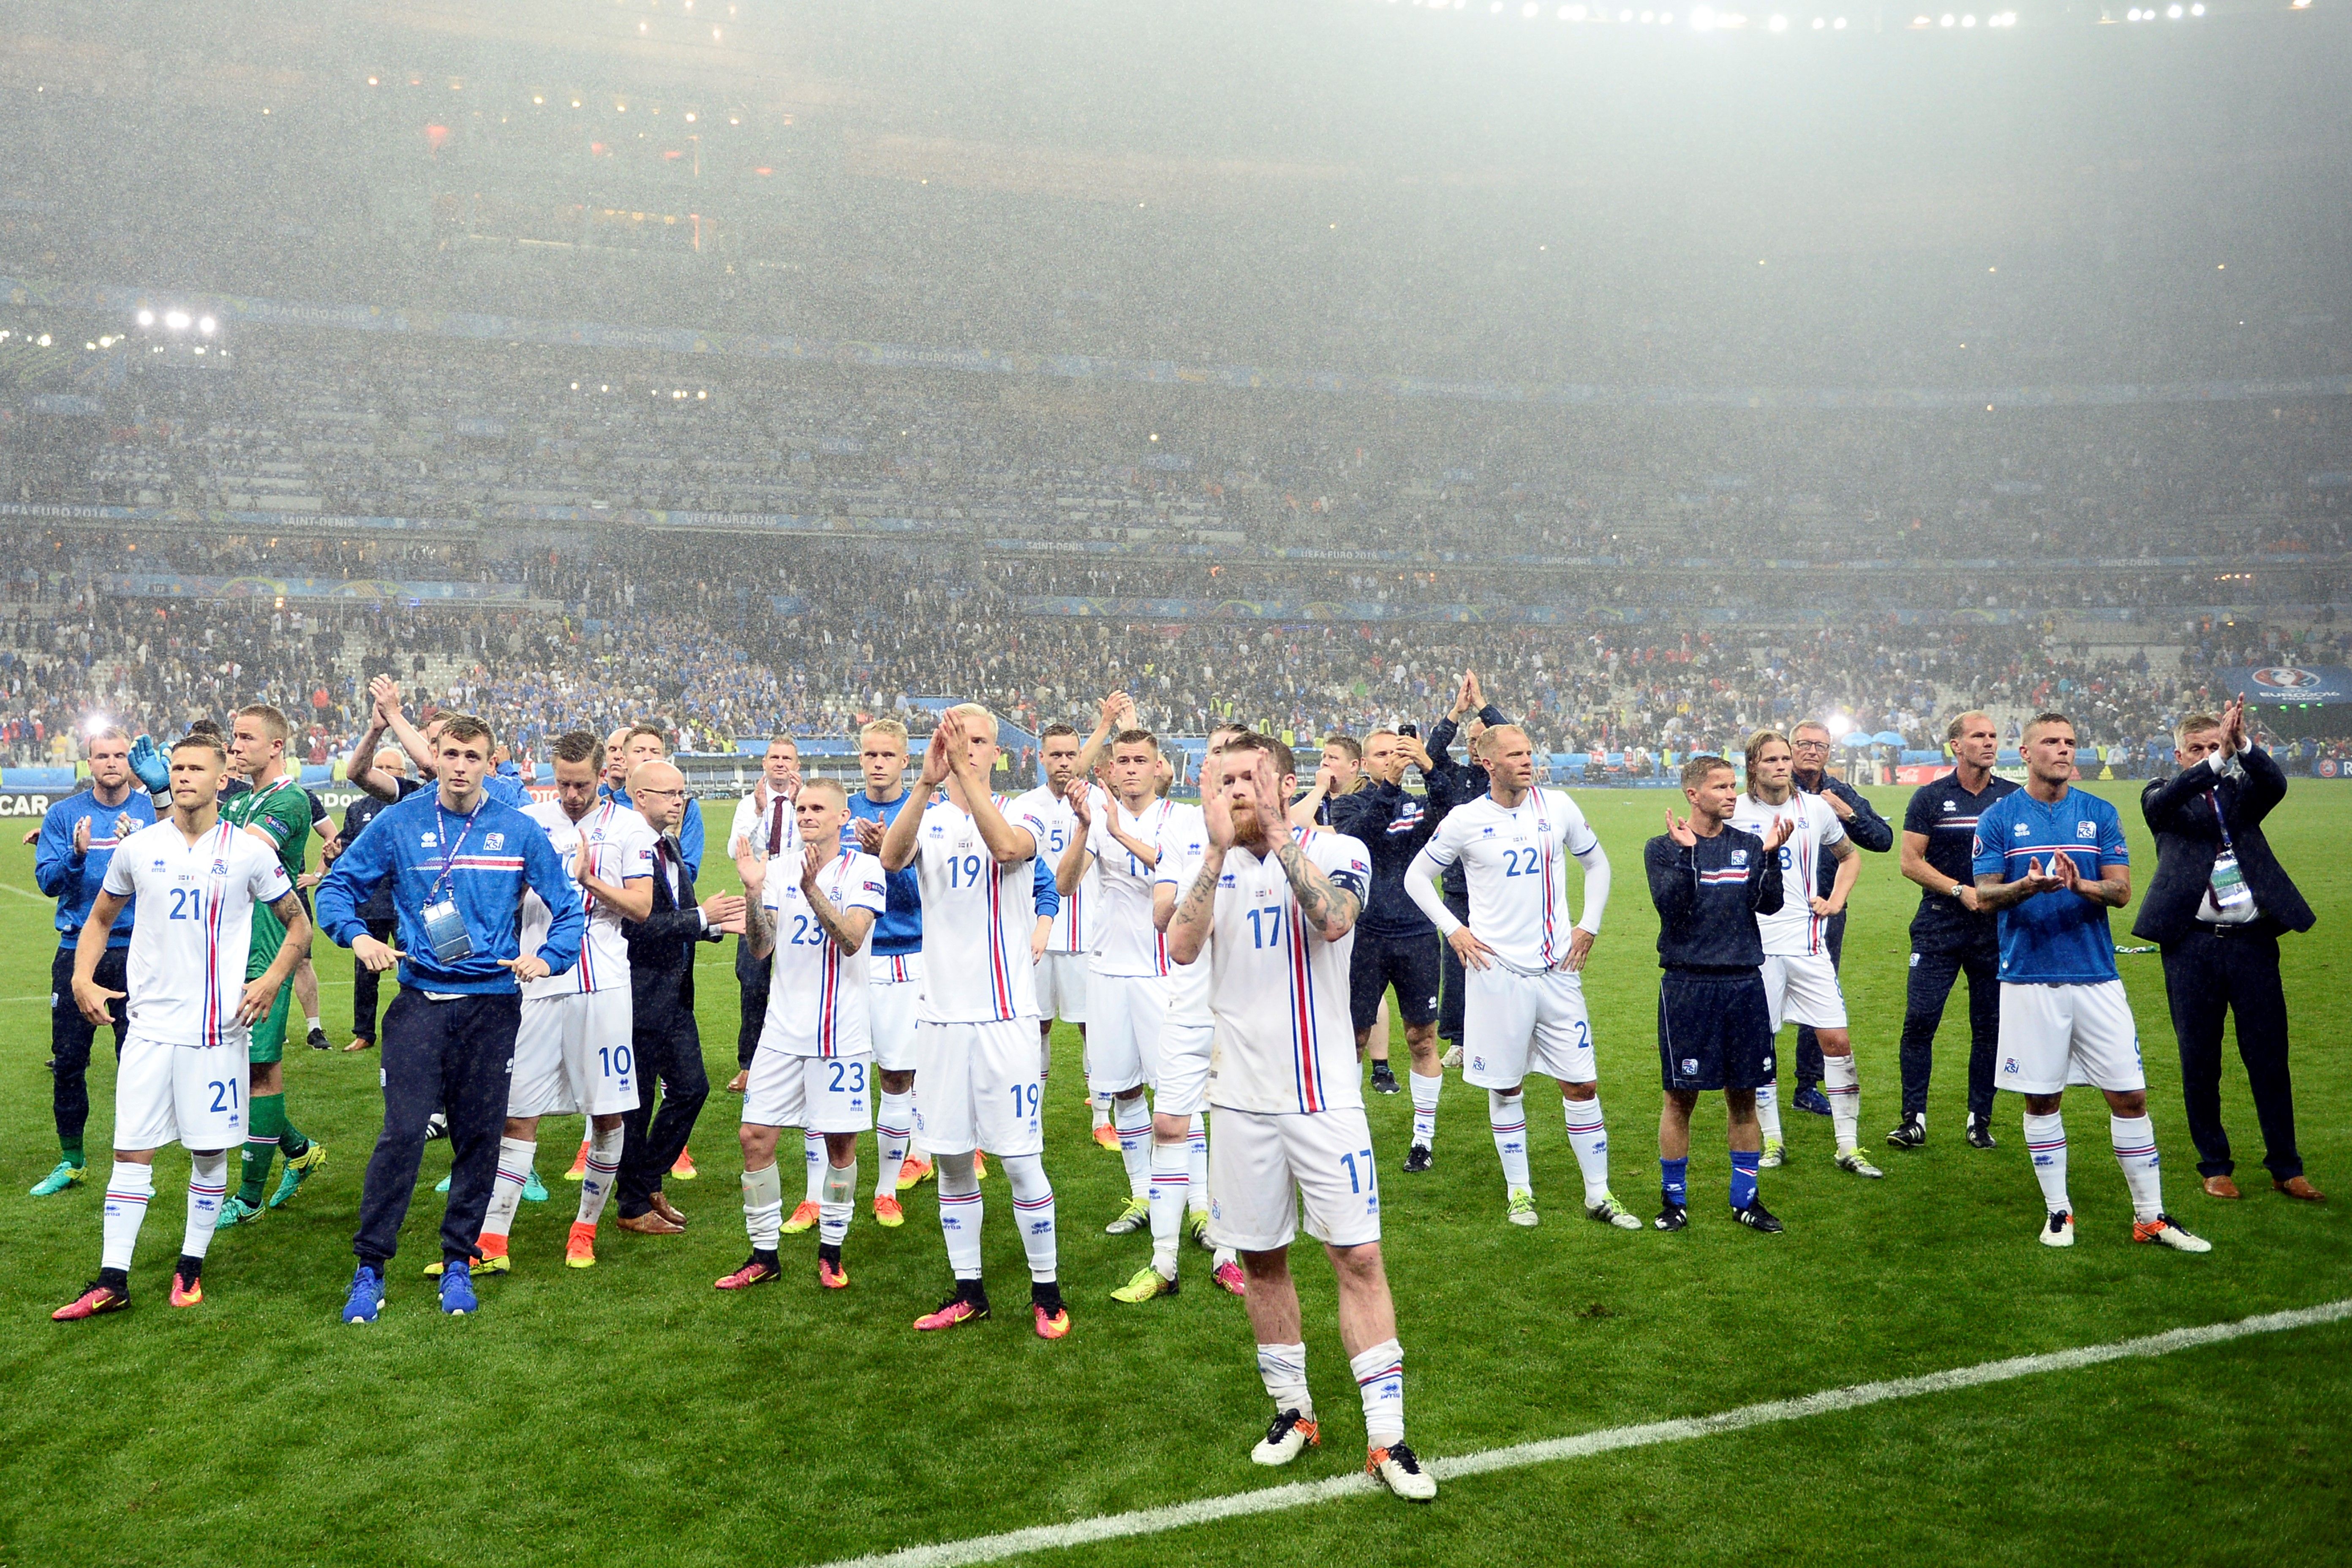 Iceland's midfielder Aron Gunnarsson (C) and team mates acknowledge the fans after the Euro 2016 quarter-final football match between France and Iceland at the Stade de France in Saint-Denis, near Paris, on July 3, 2016. 
France won the match 5-2. / AFP / MARTIN BUREAU        (Photo credit should read MARTIN BUREAU/AFP/Getty Images)